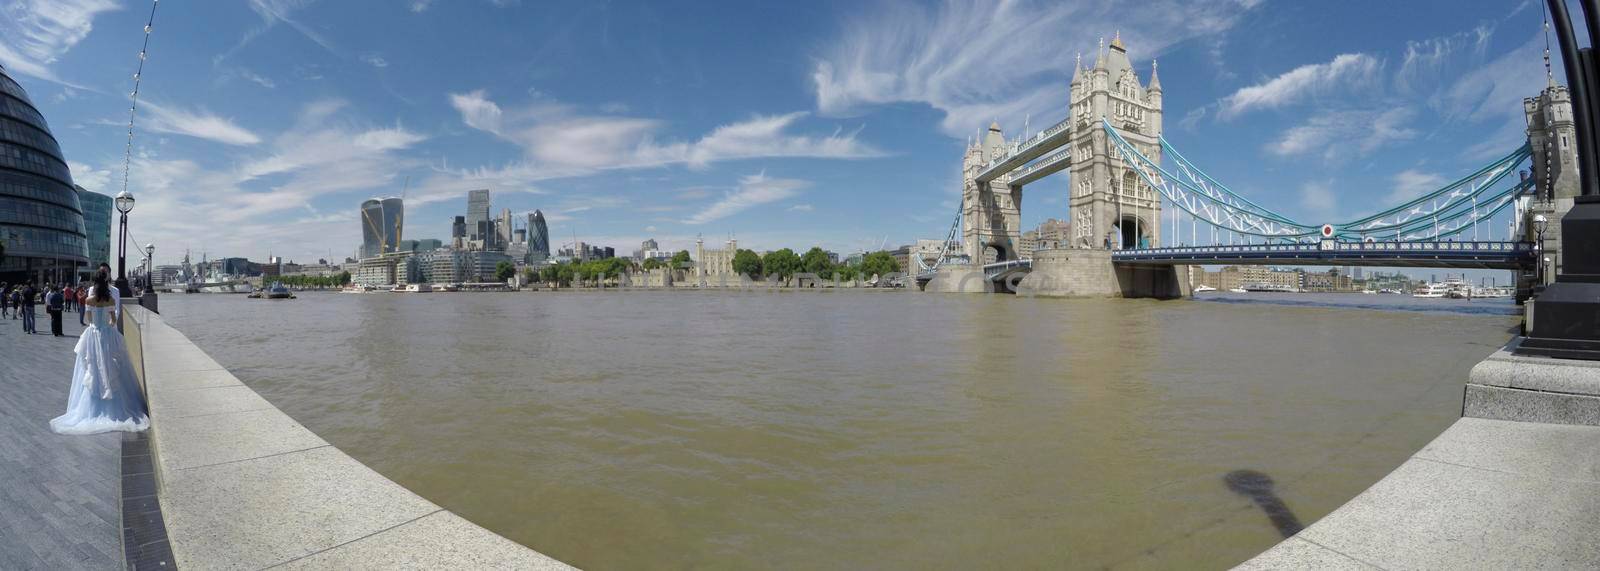 Tower Bridge, Tower of London and Financial District of London, panning shot by zefart